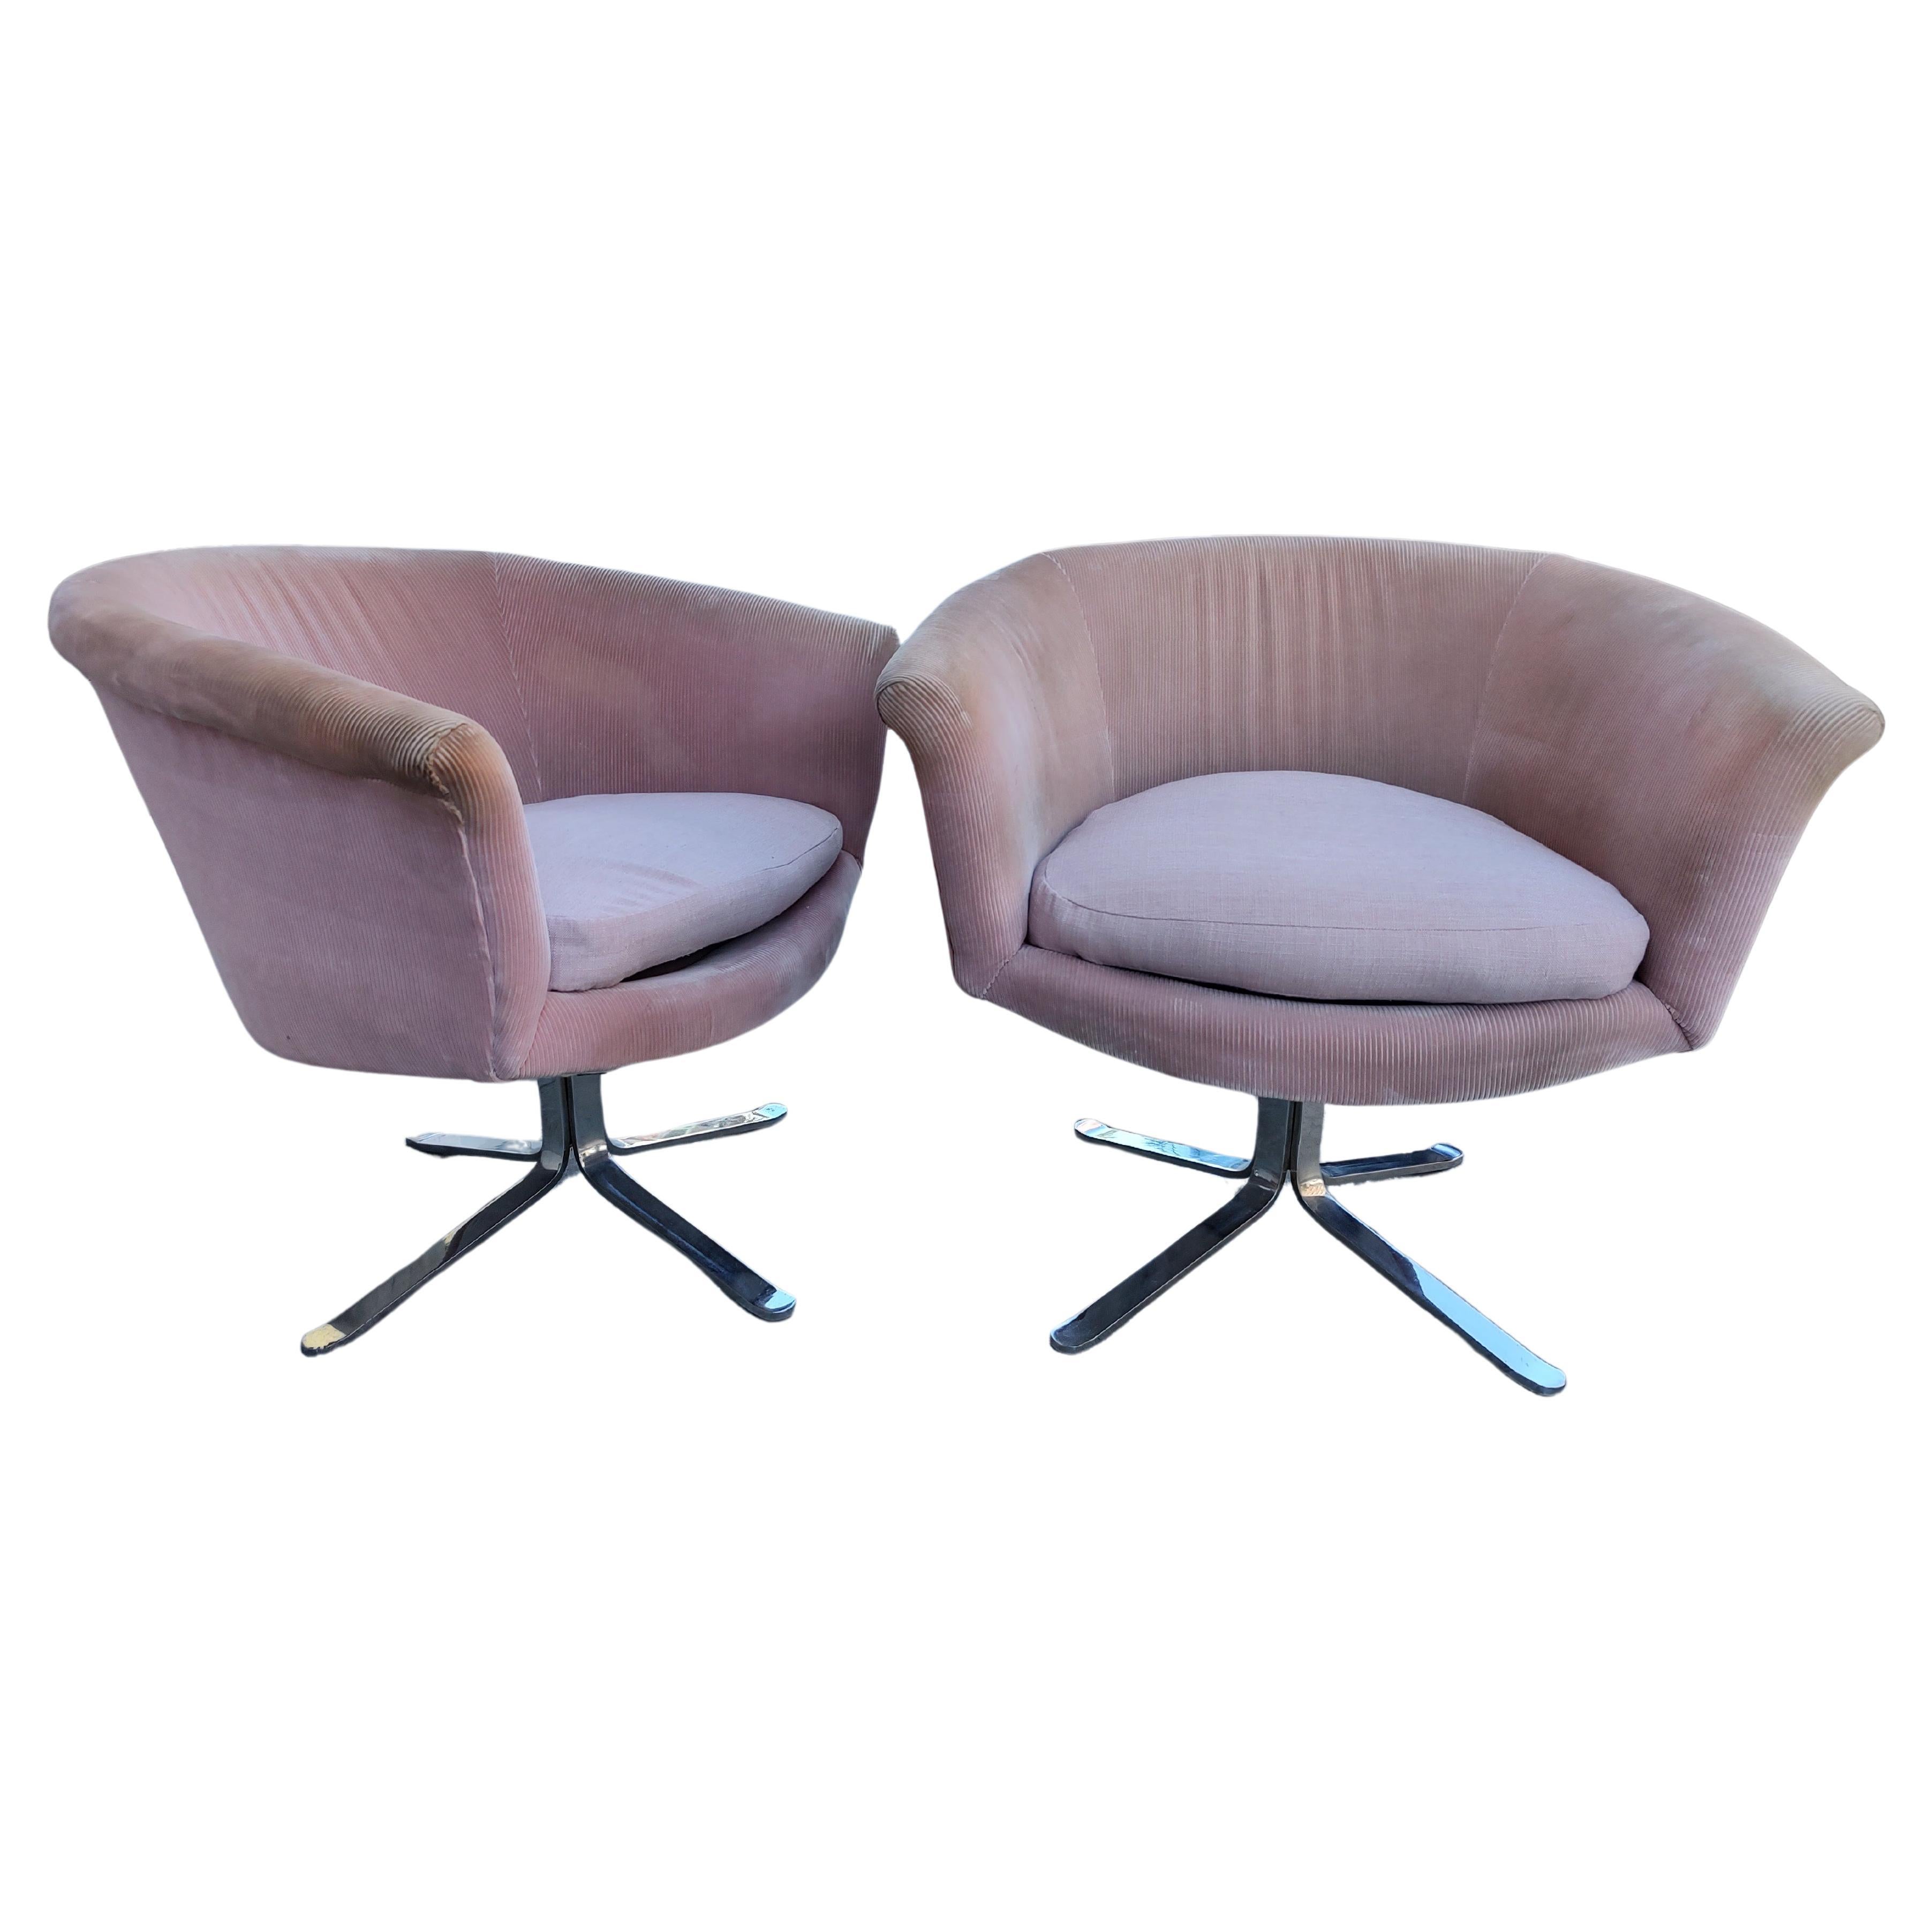 Pair of Mid-Century Modern Swiveling Lounge Barrell Back Club Chairs, C1960 For Sale